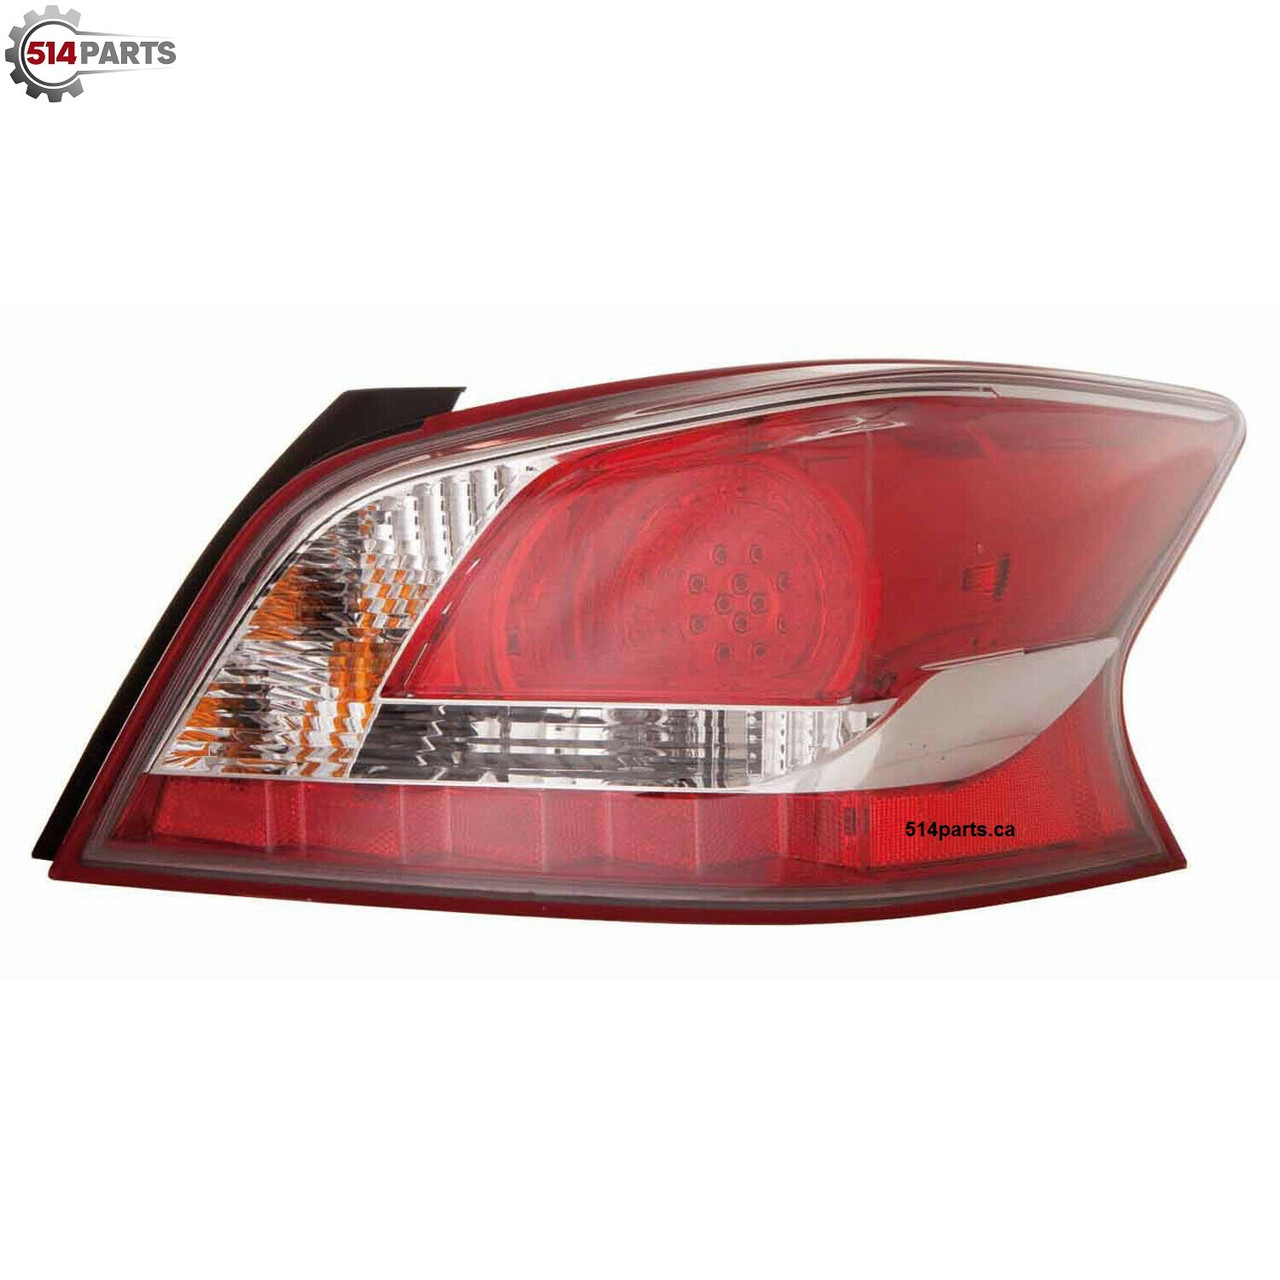 2013 - 2014 NISSAN ALTIMA LED TAIL LIGHTS High Quality - PHARES ARRIERE a LED Haute Qualite